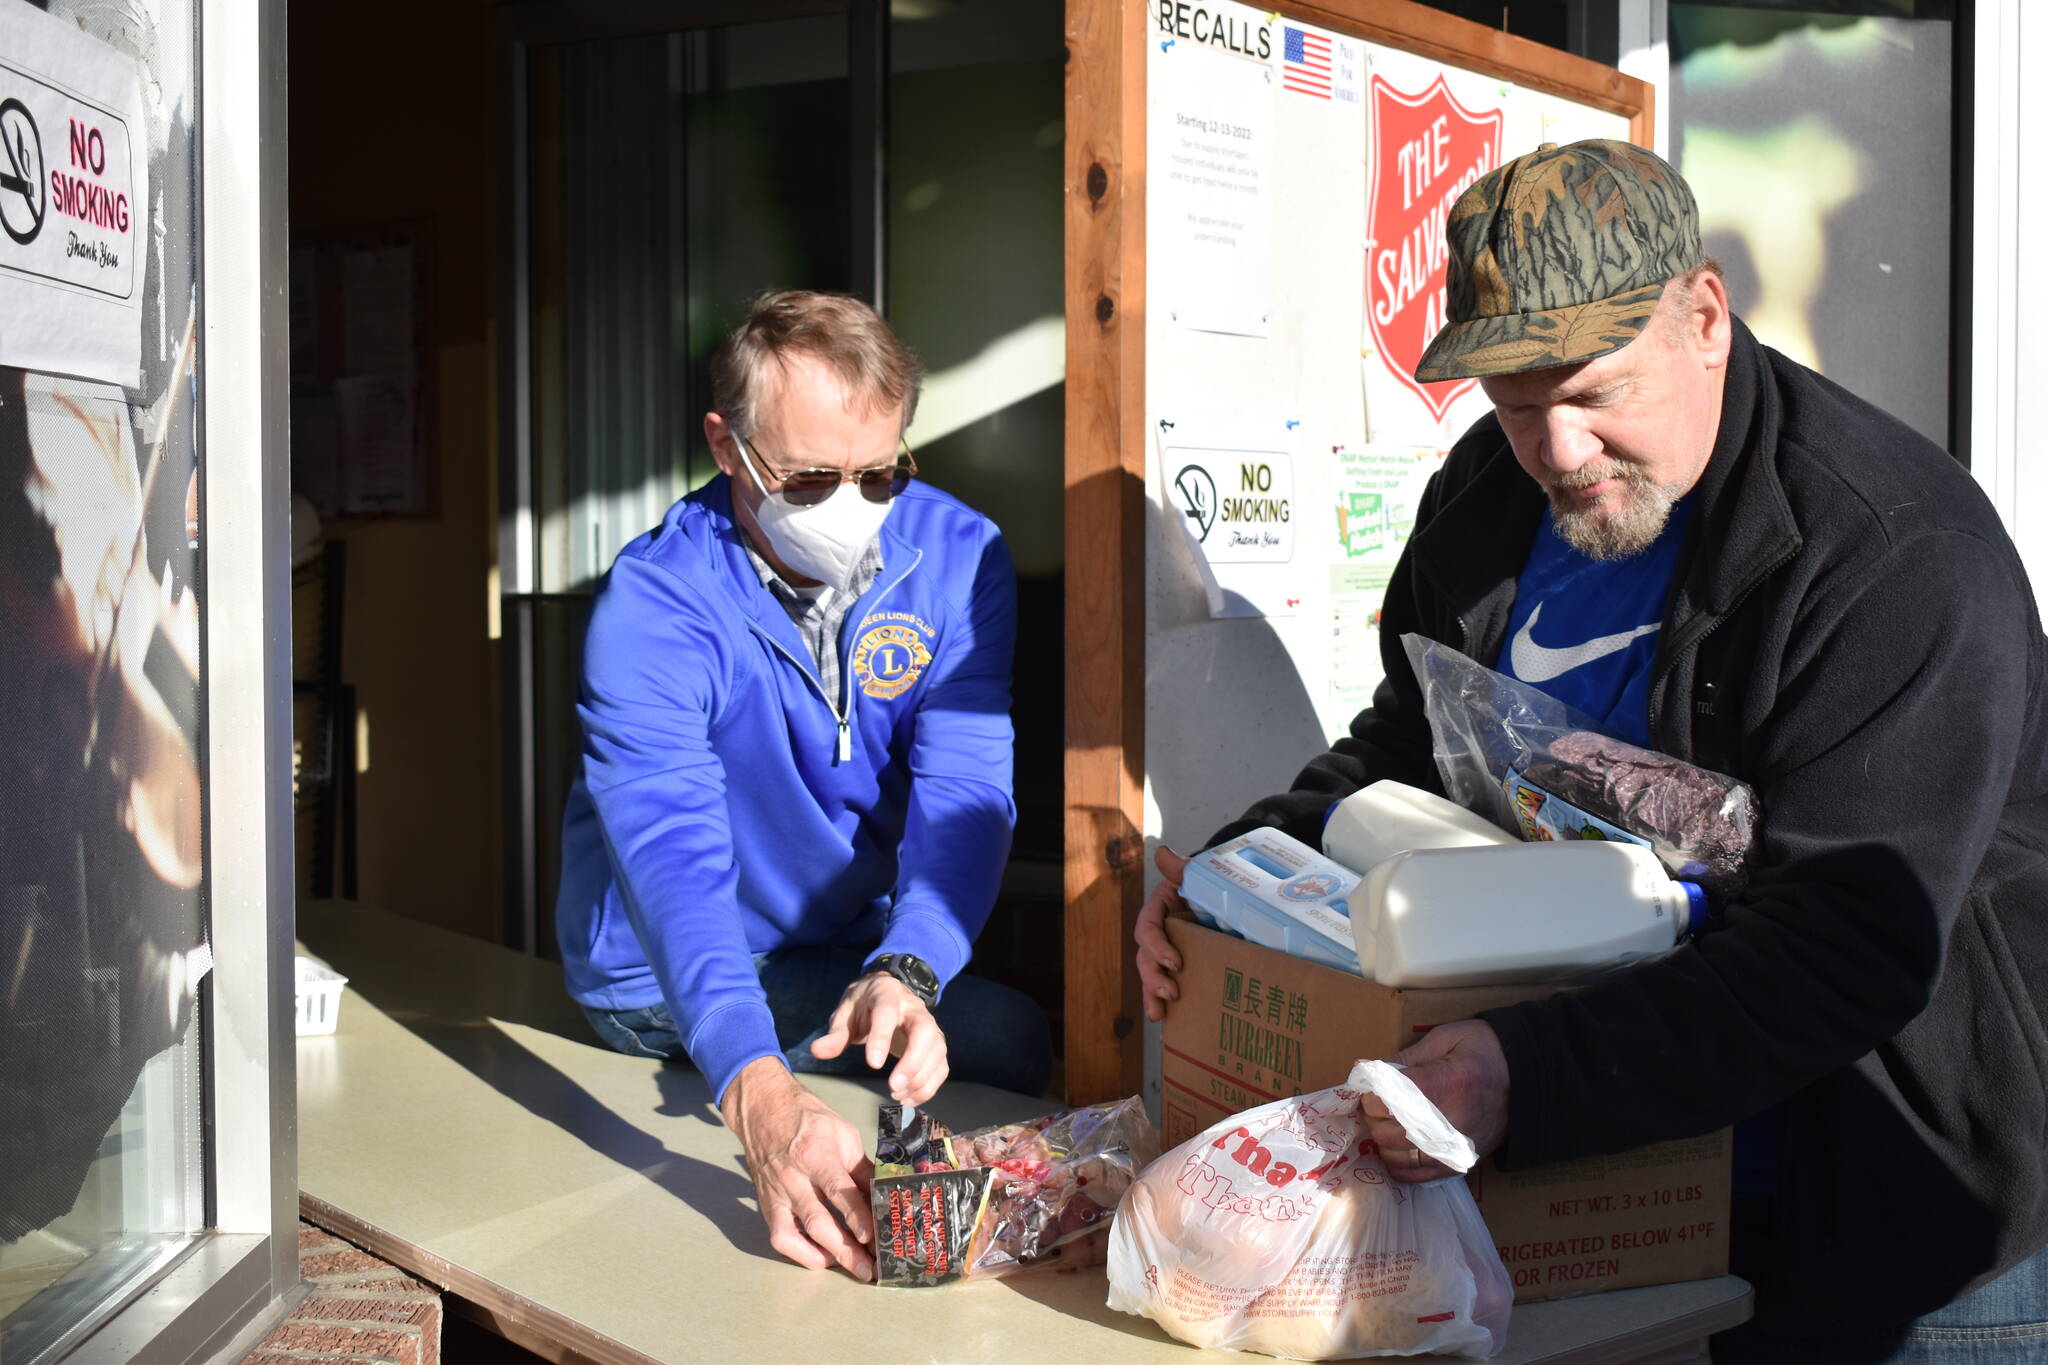 Volunteer Greg Johnstone, left, slides a box of food to Jerry Nelson Dec. 15 at the Aberdeen Salvation Army food pantry, 120 W Wishkah St. The pantry serves roughly triple the amount of people it did one year ago. (Clayton Franke / The Daily World)